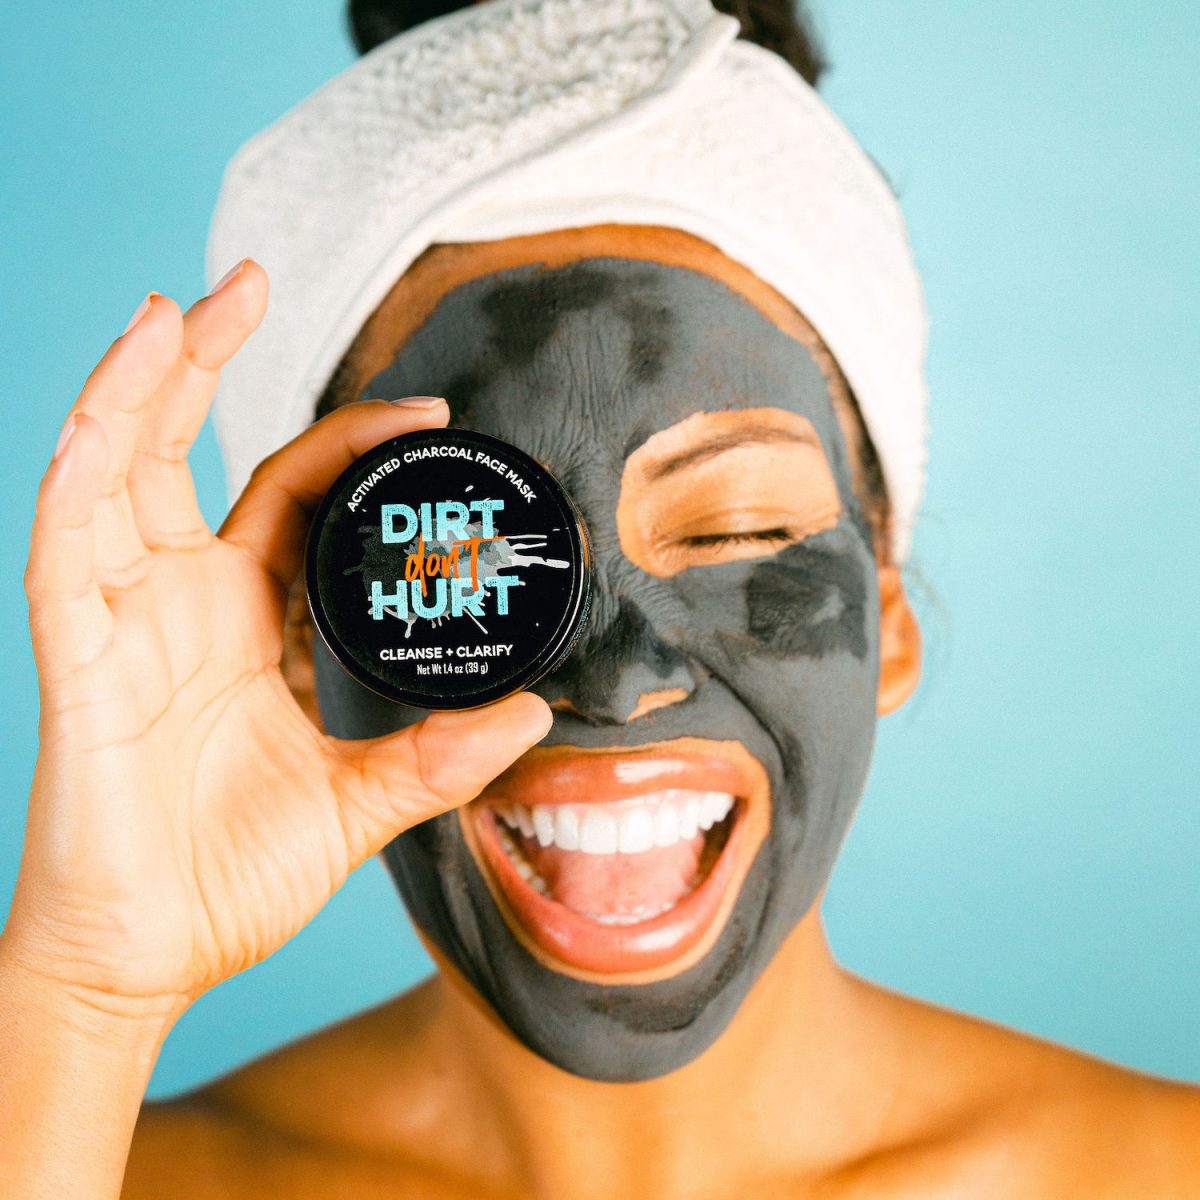 Dirt Don't Hurt Charcoal beauty company product featuring women with towel on head and charcoal facemask applied